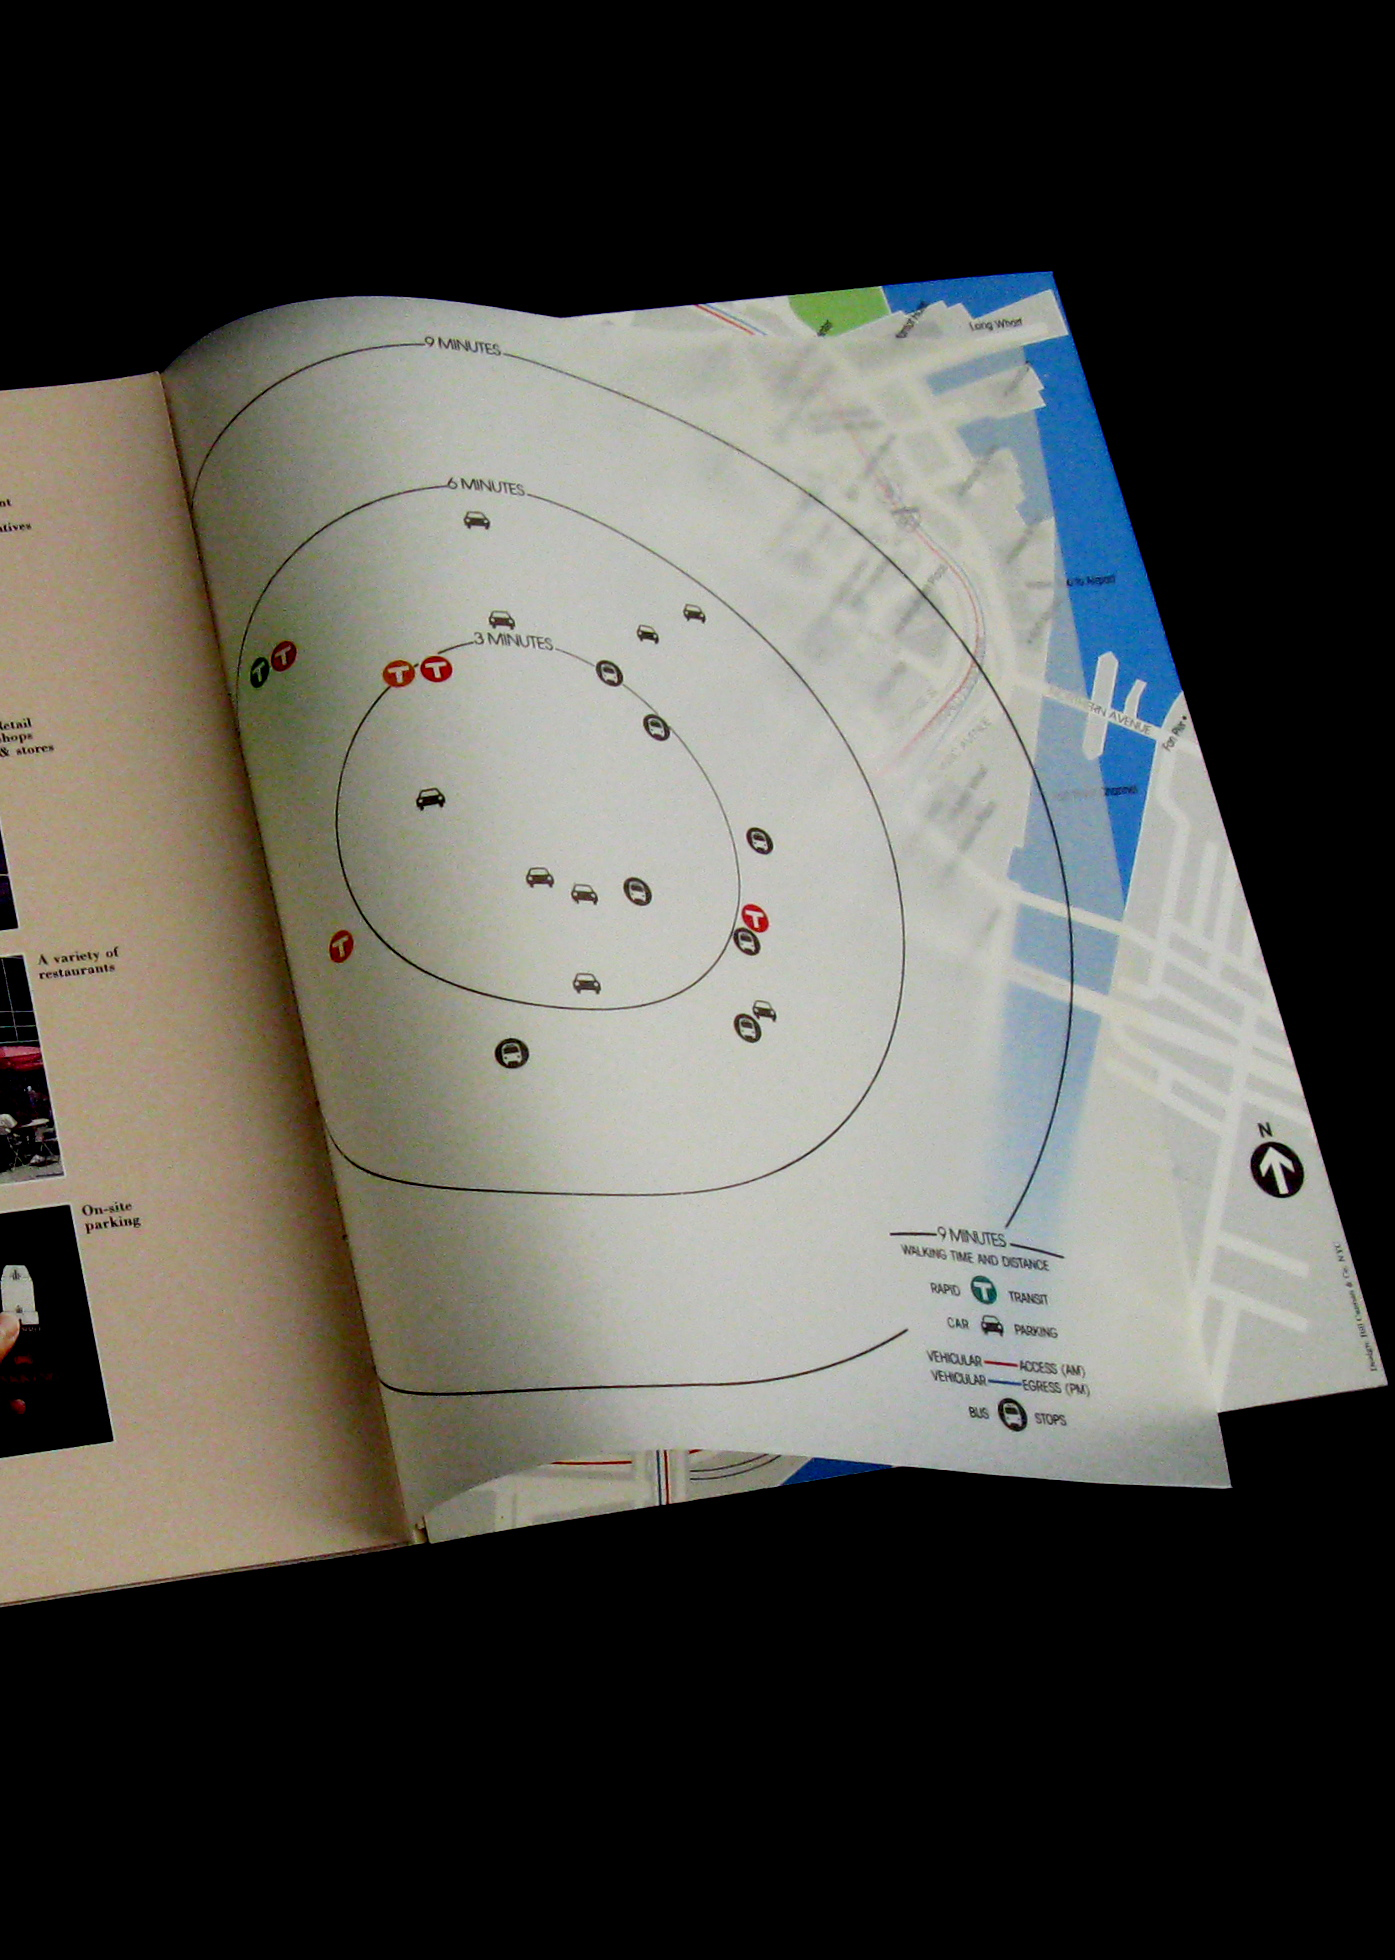 Brochure opened to a map page with translucent overlay showing distances and walking times.